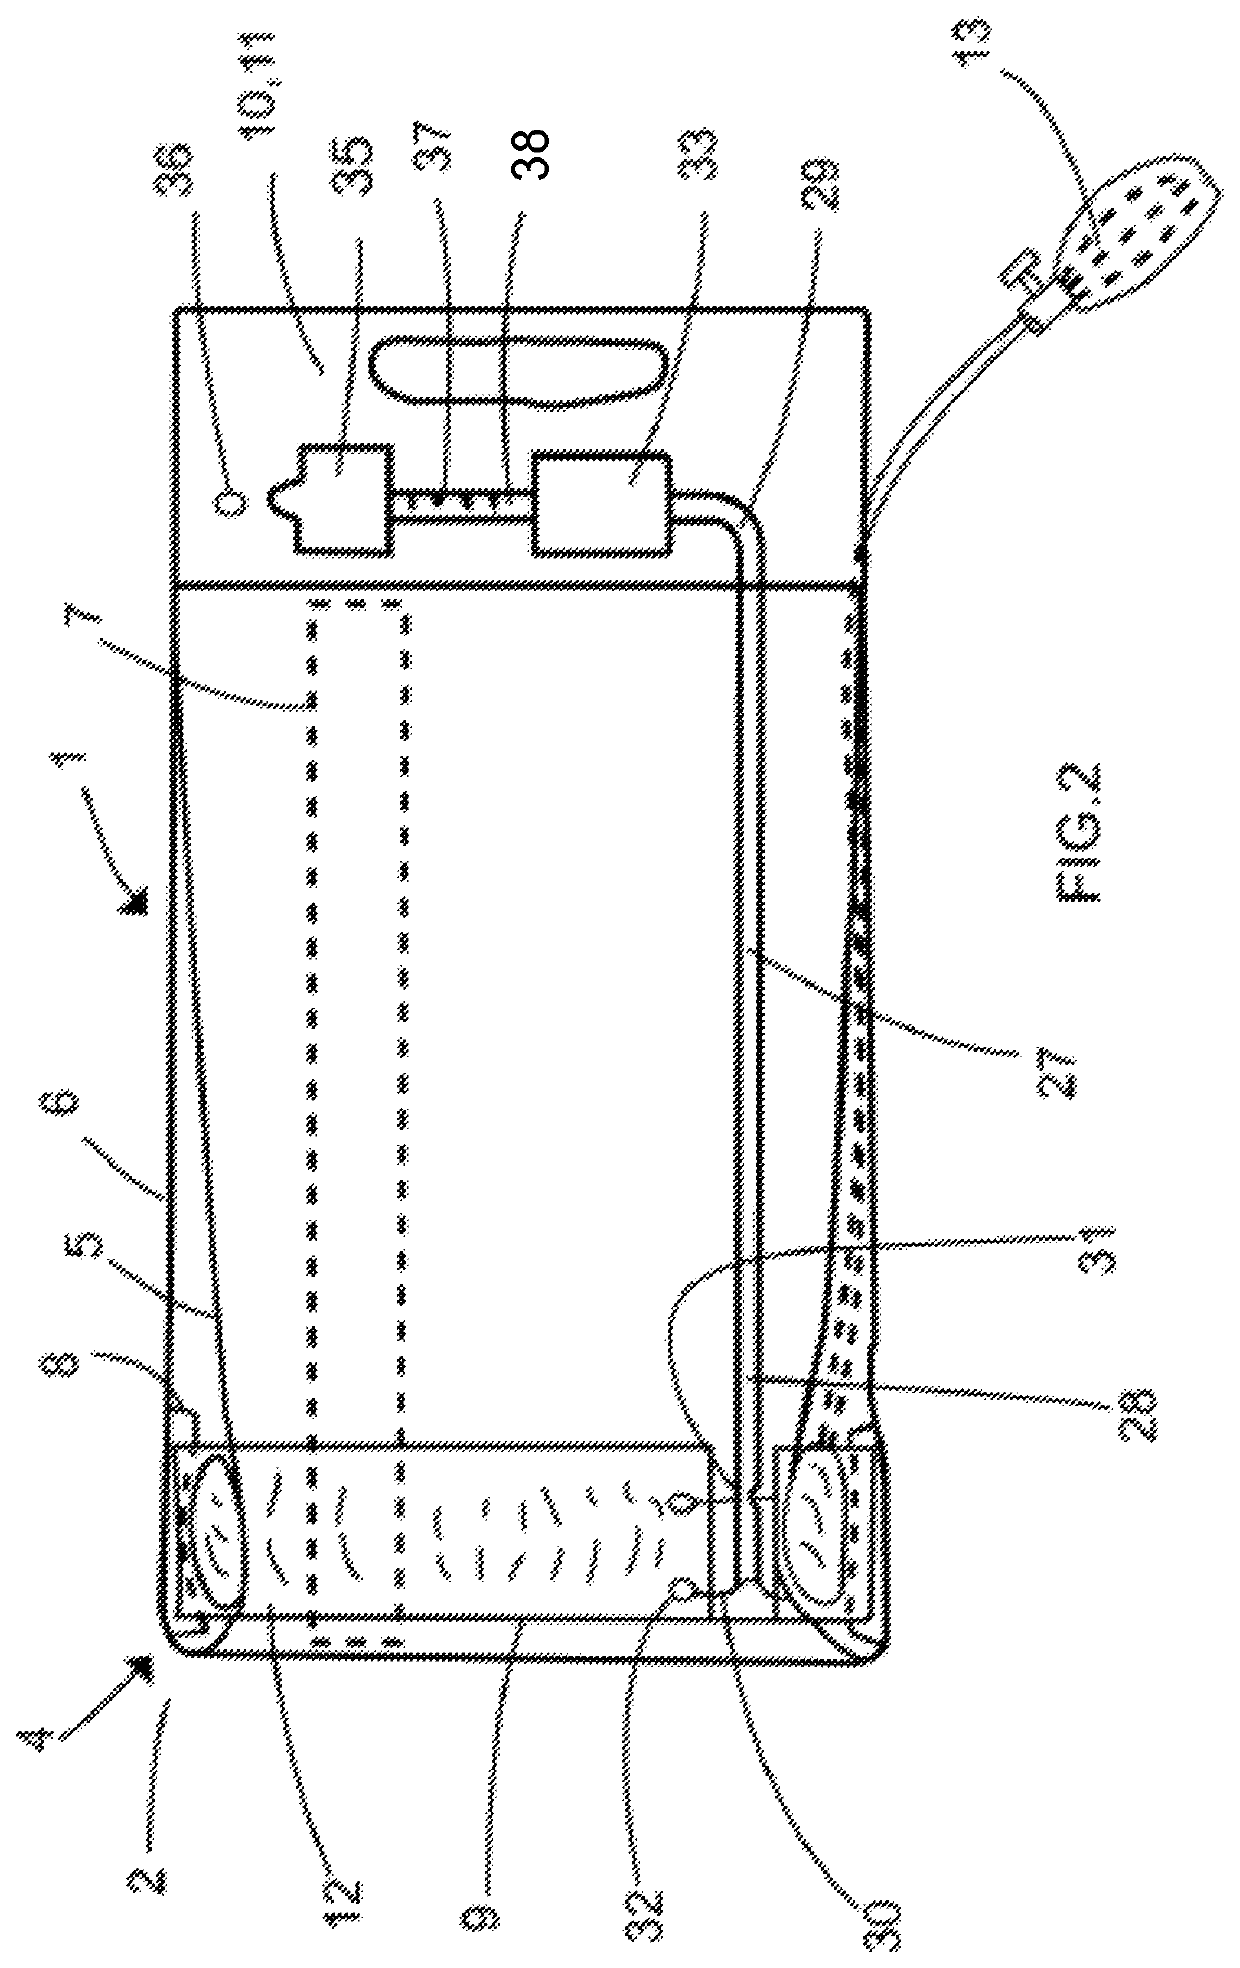 Diameter regulator of a device used to extract an element that is inside a cavity and method of use